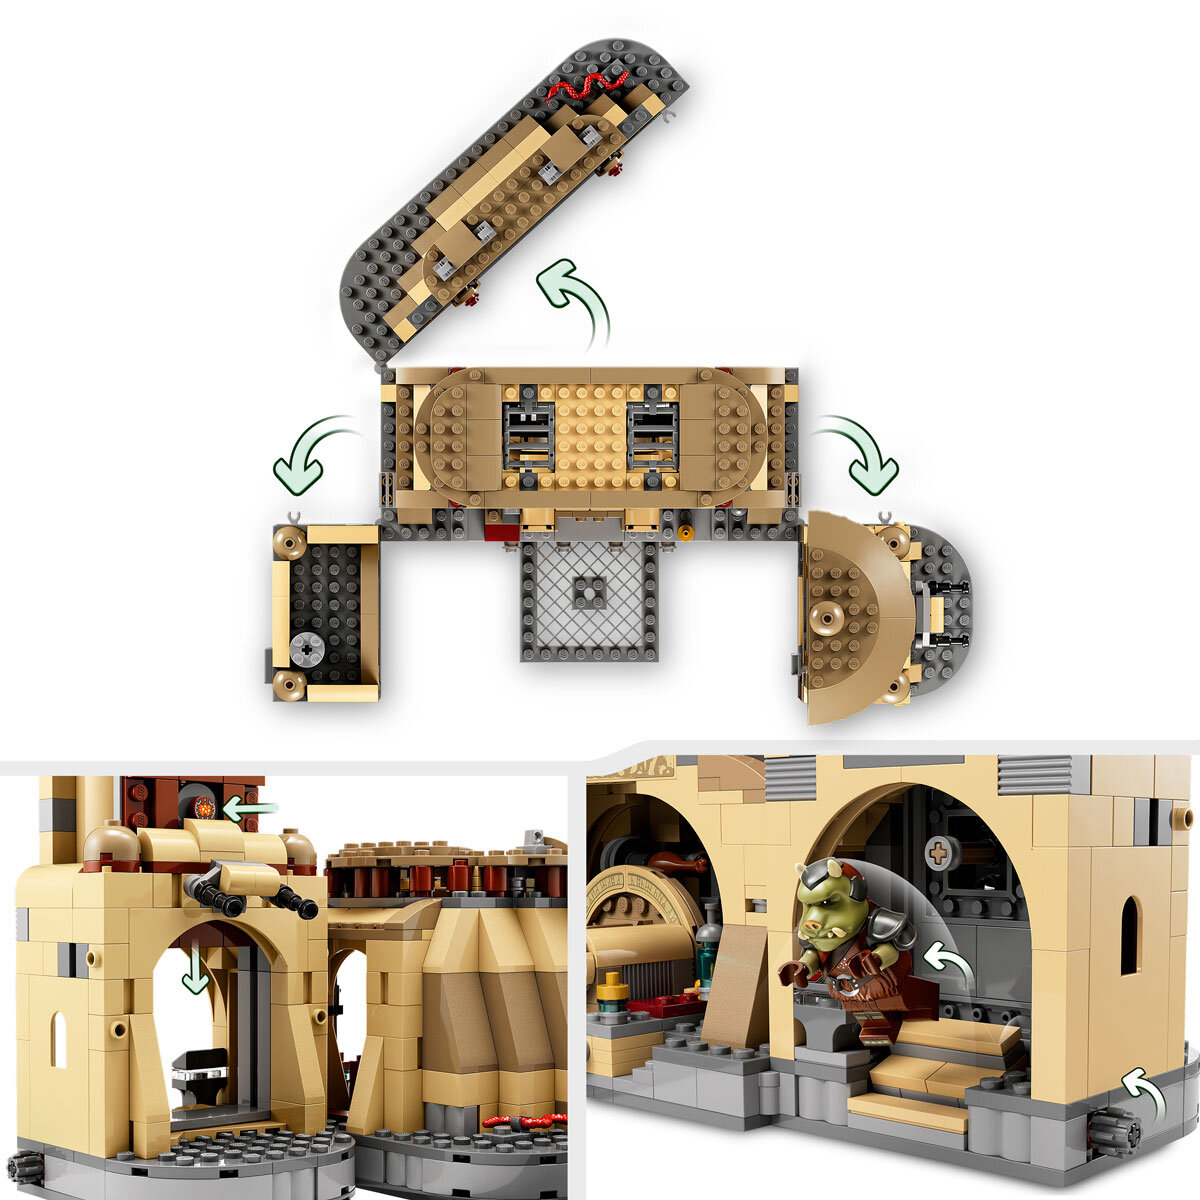 Buy LEGO Star Wars Boba Fett's Throne Room Features1 Image at Costco.co.uk